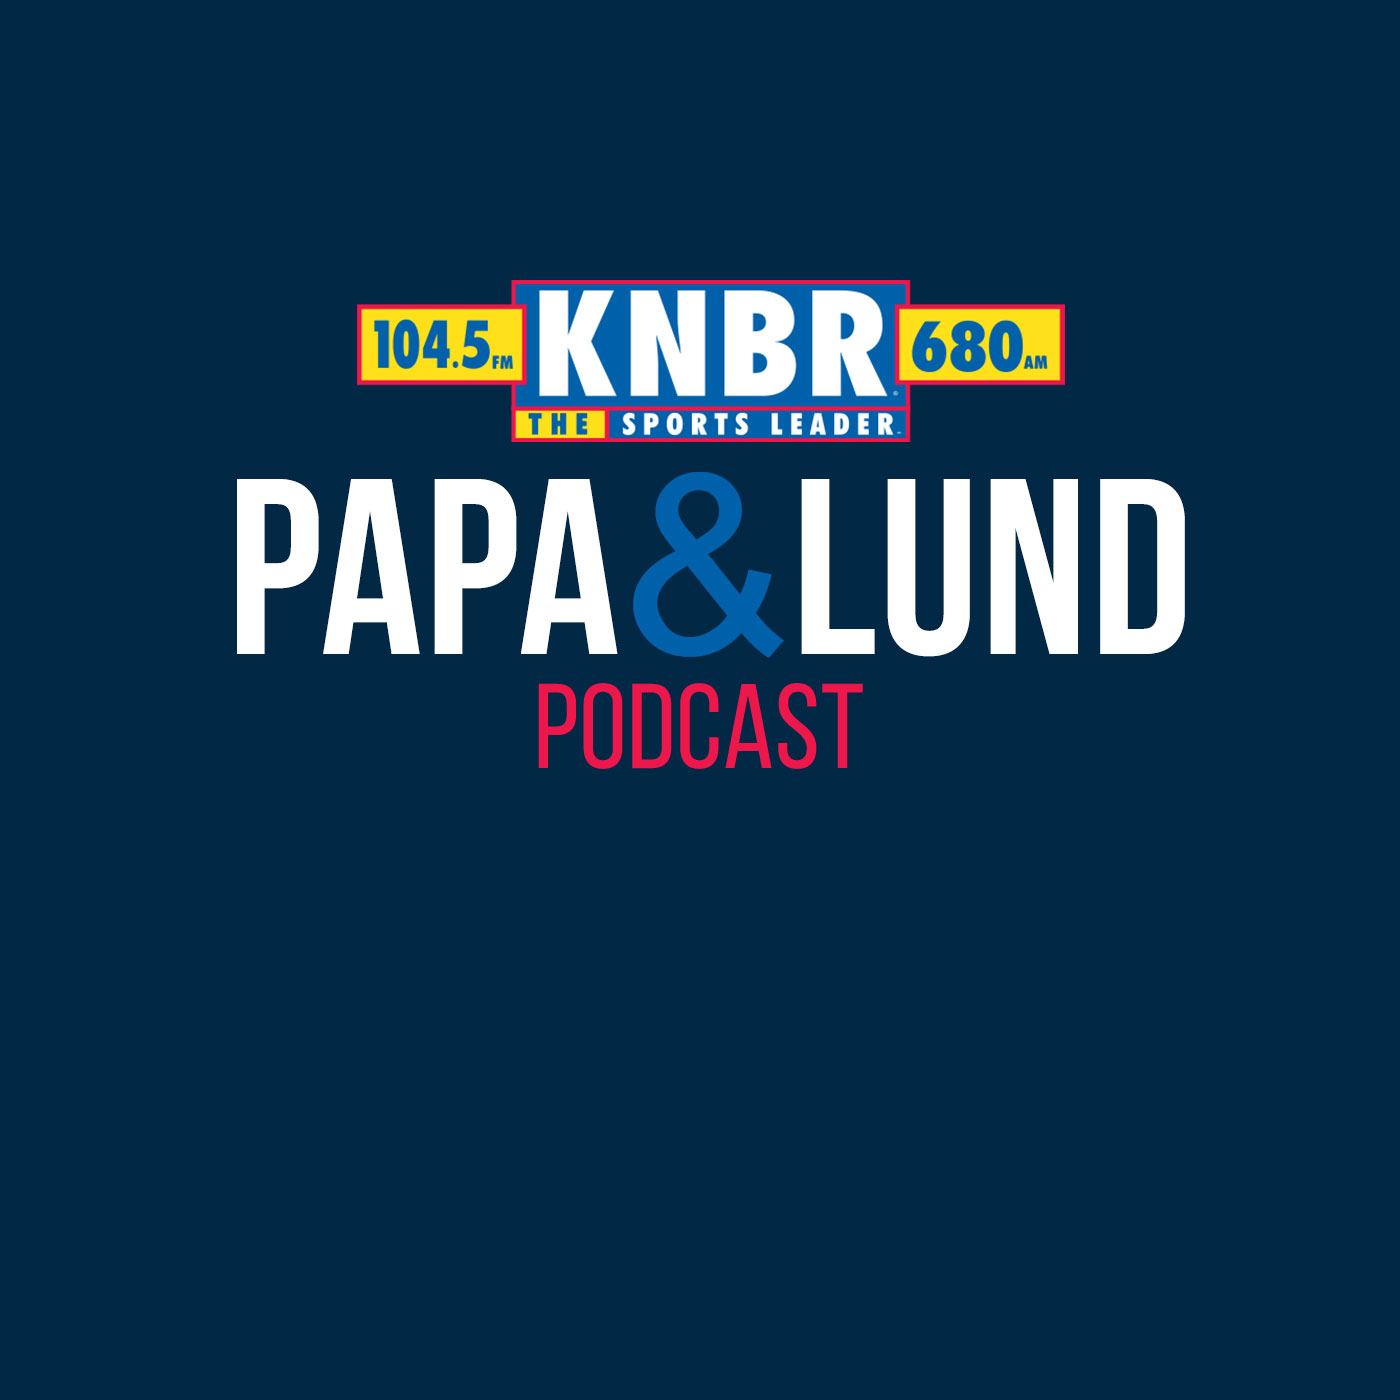 2-8 Brian Anderson joins Papa & Lund to relive the moment the Lebron James passed Kareem Abdul-Jabbar and became the NBA All-time leading scorer